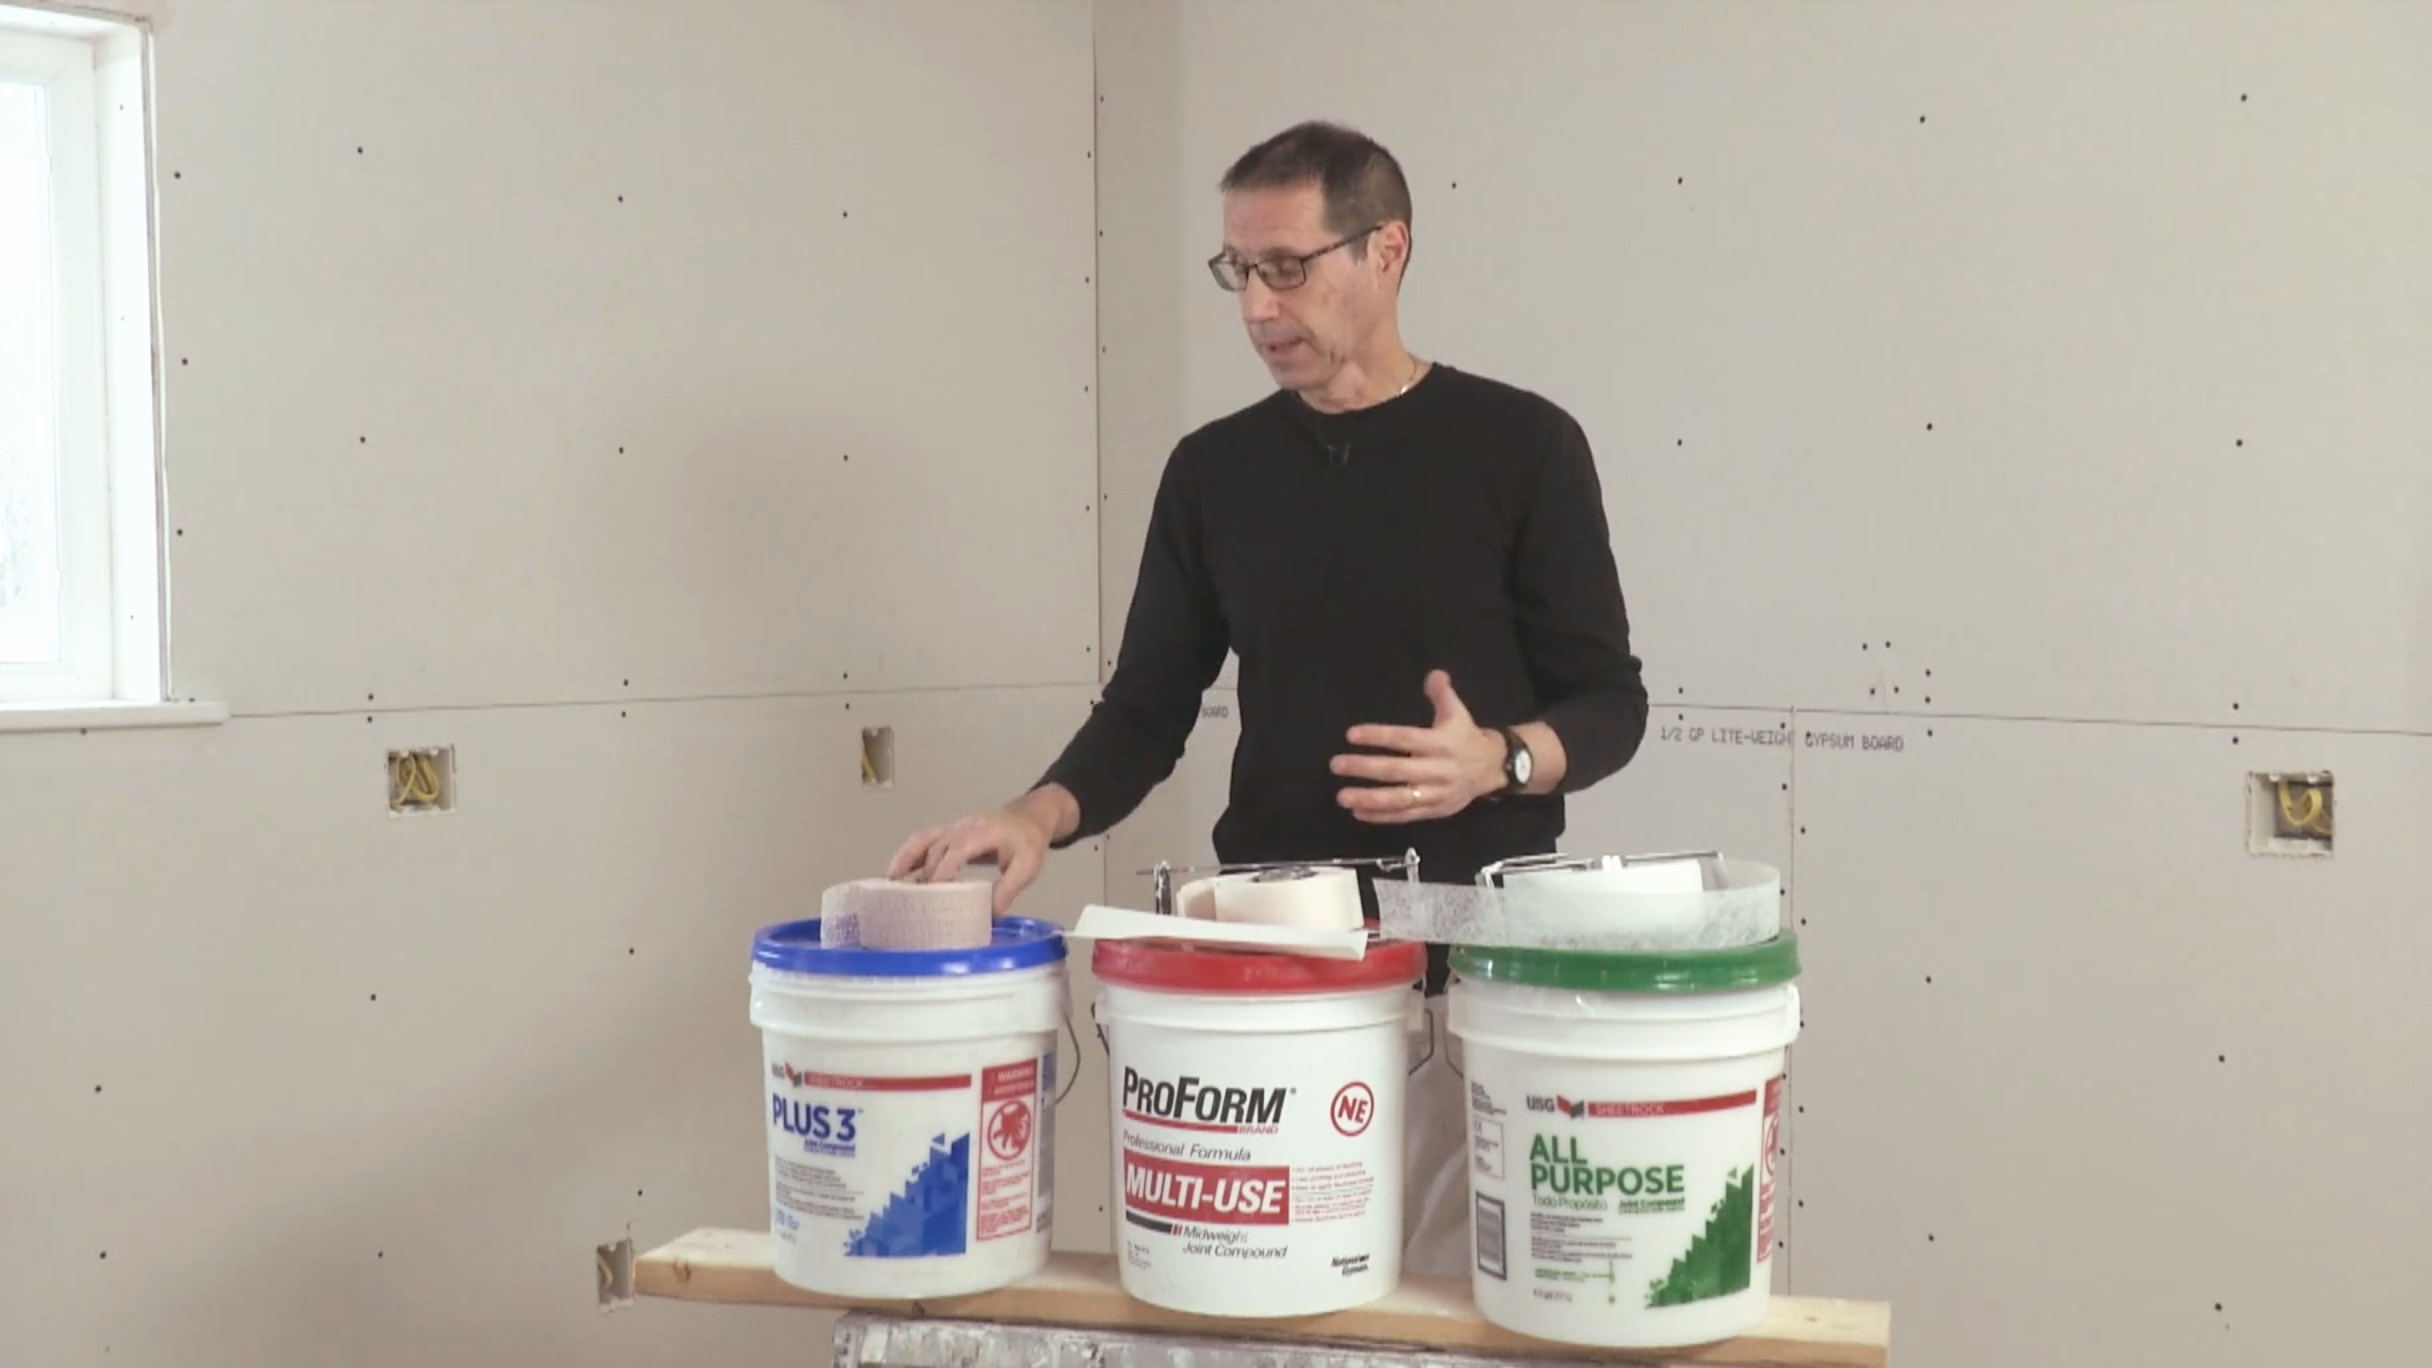 Myron with a display of different drywall tape